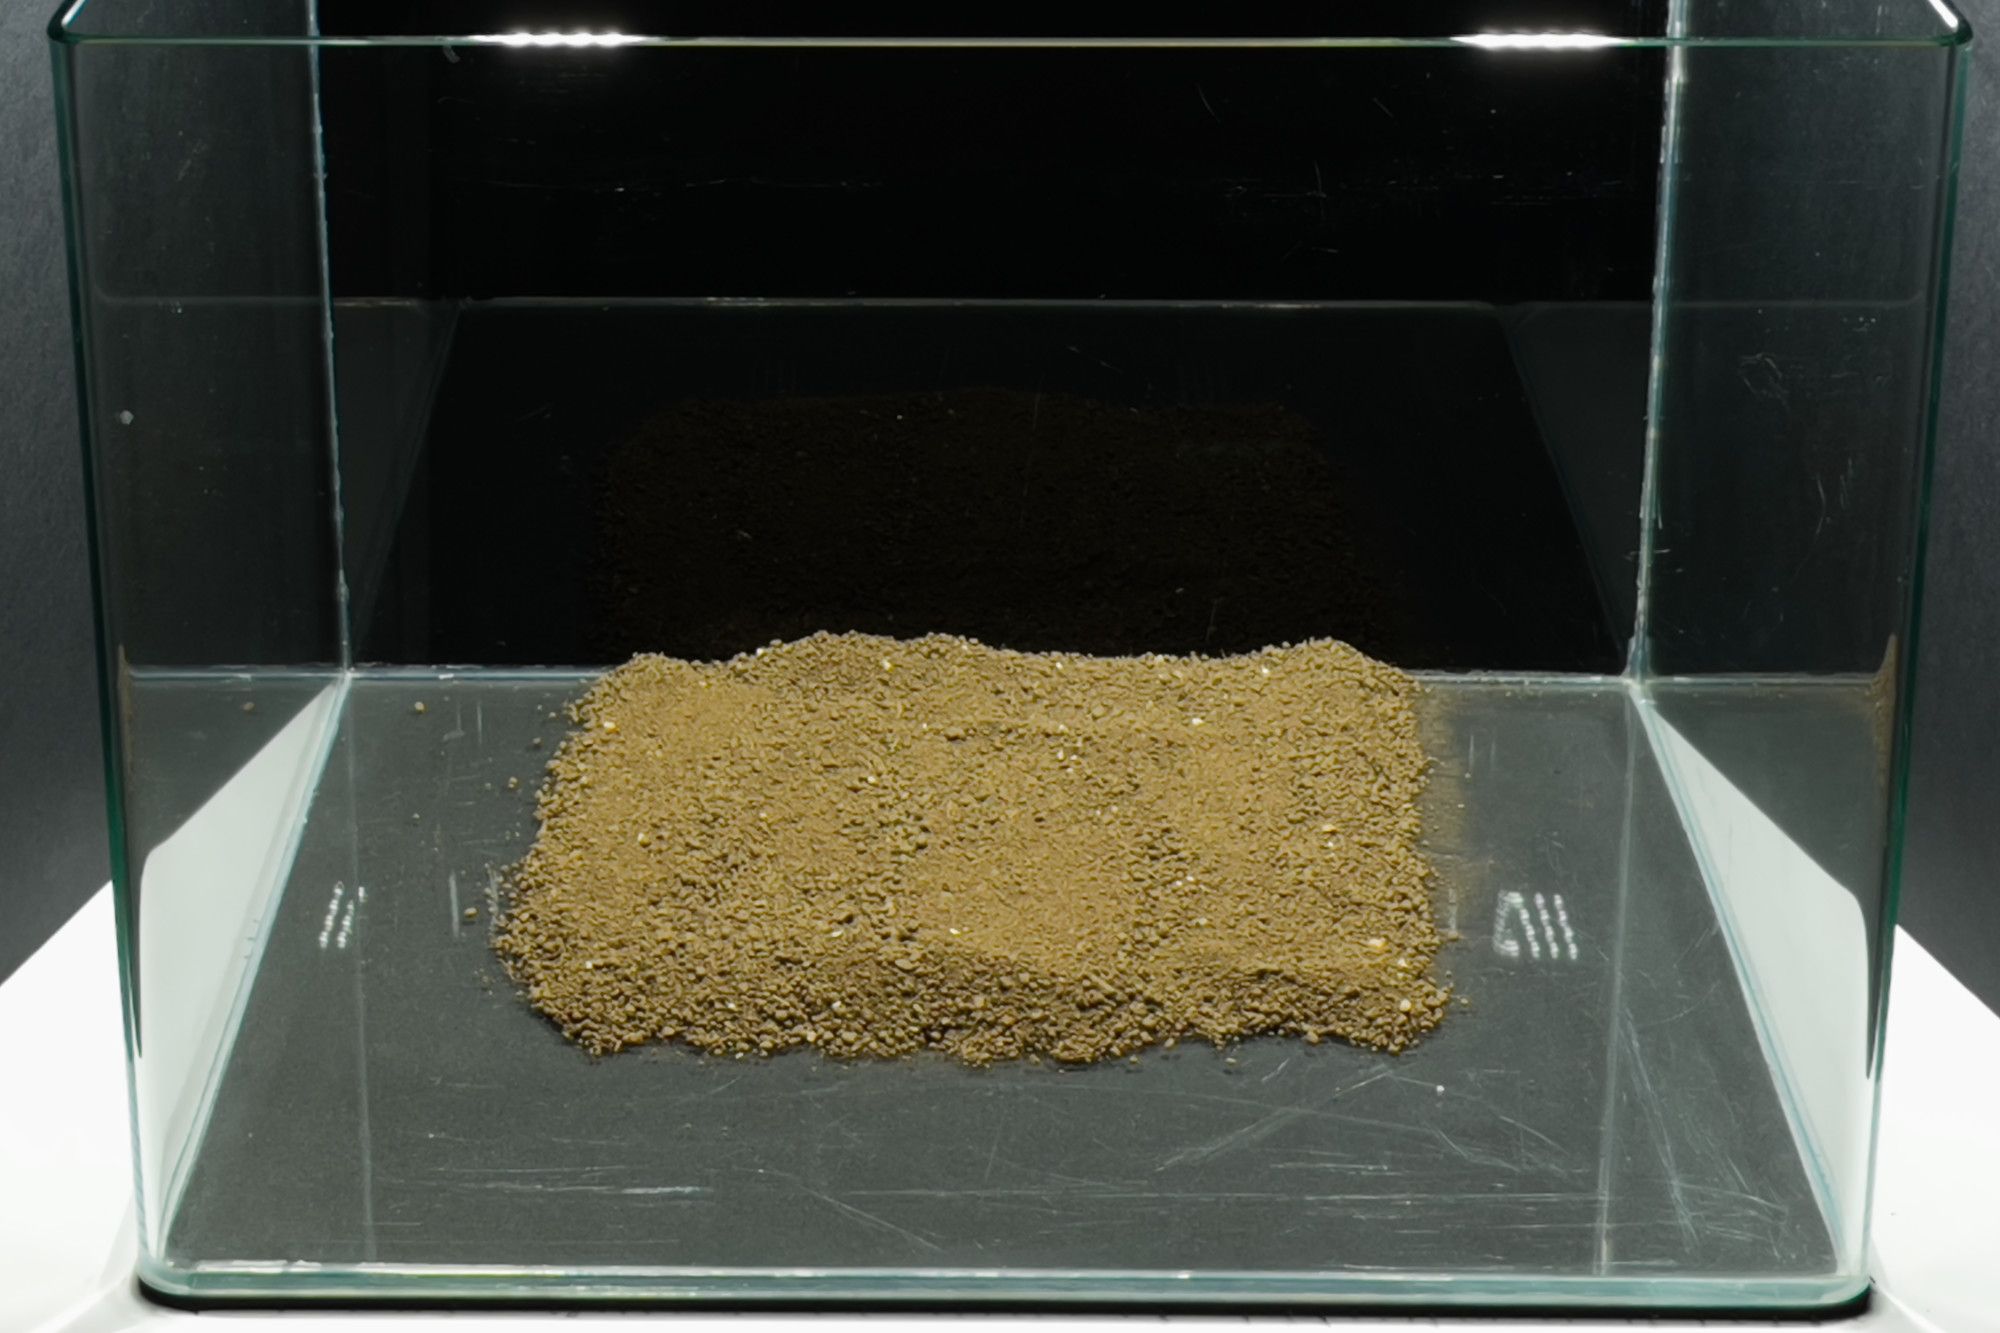 No-filter aquarium with completed plant growth substrate layer